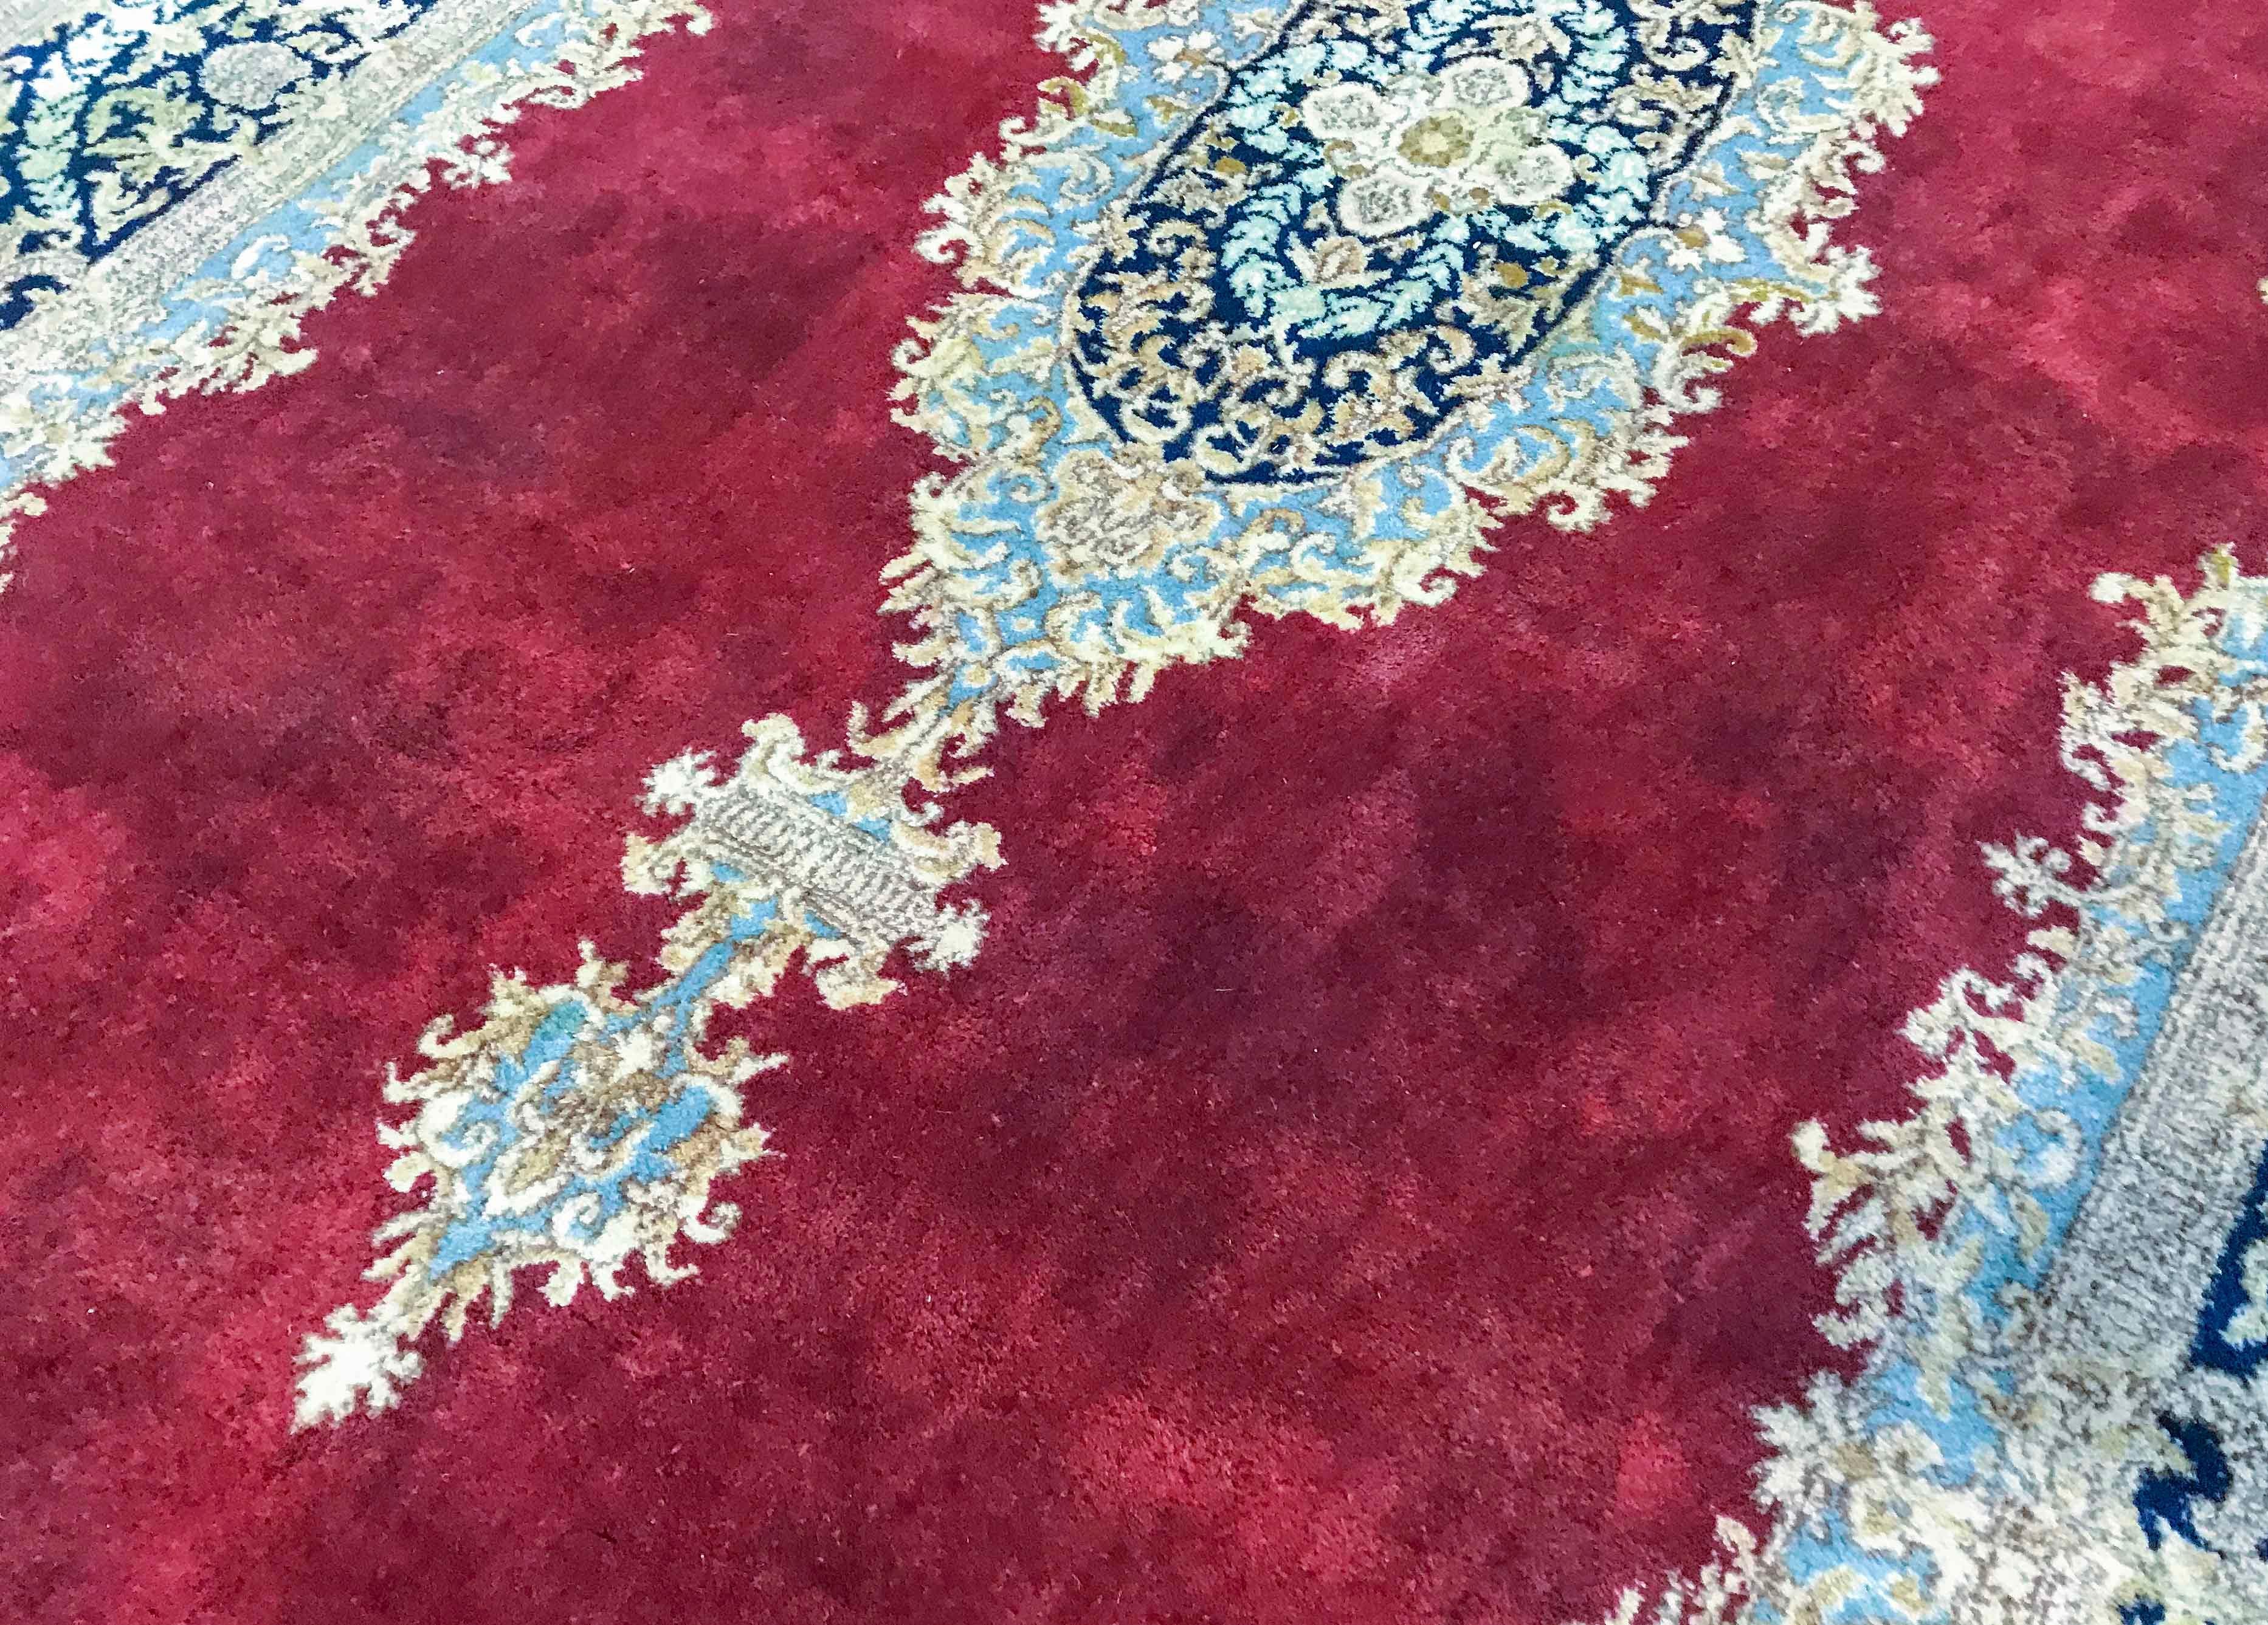 Vintage Persian Kerman rug, circa 1940. An impressive looking narrow rug with the wonderful deep red field having a light medallion which coloration is repeated in the sides and border to create a rug that will influence the setting it is placed in.